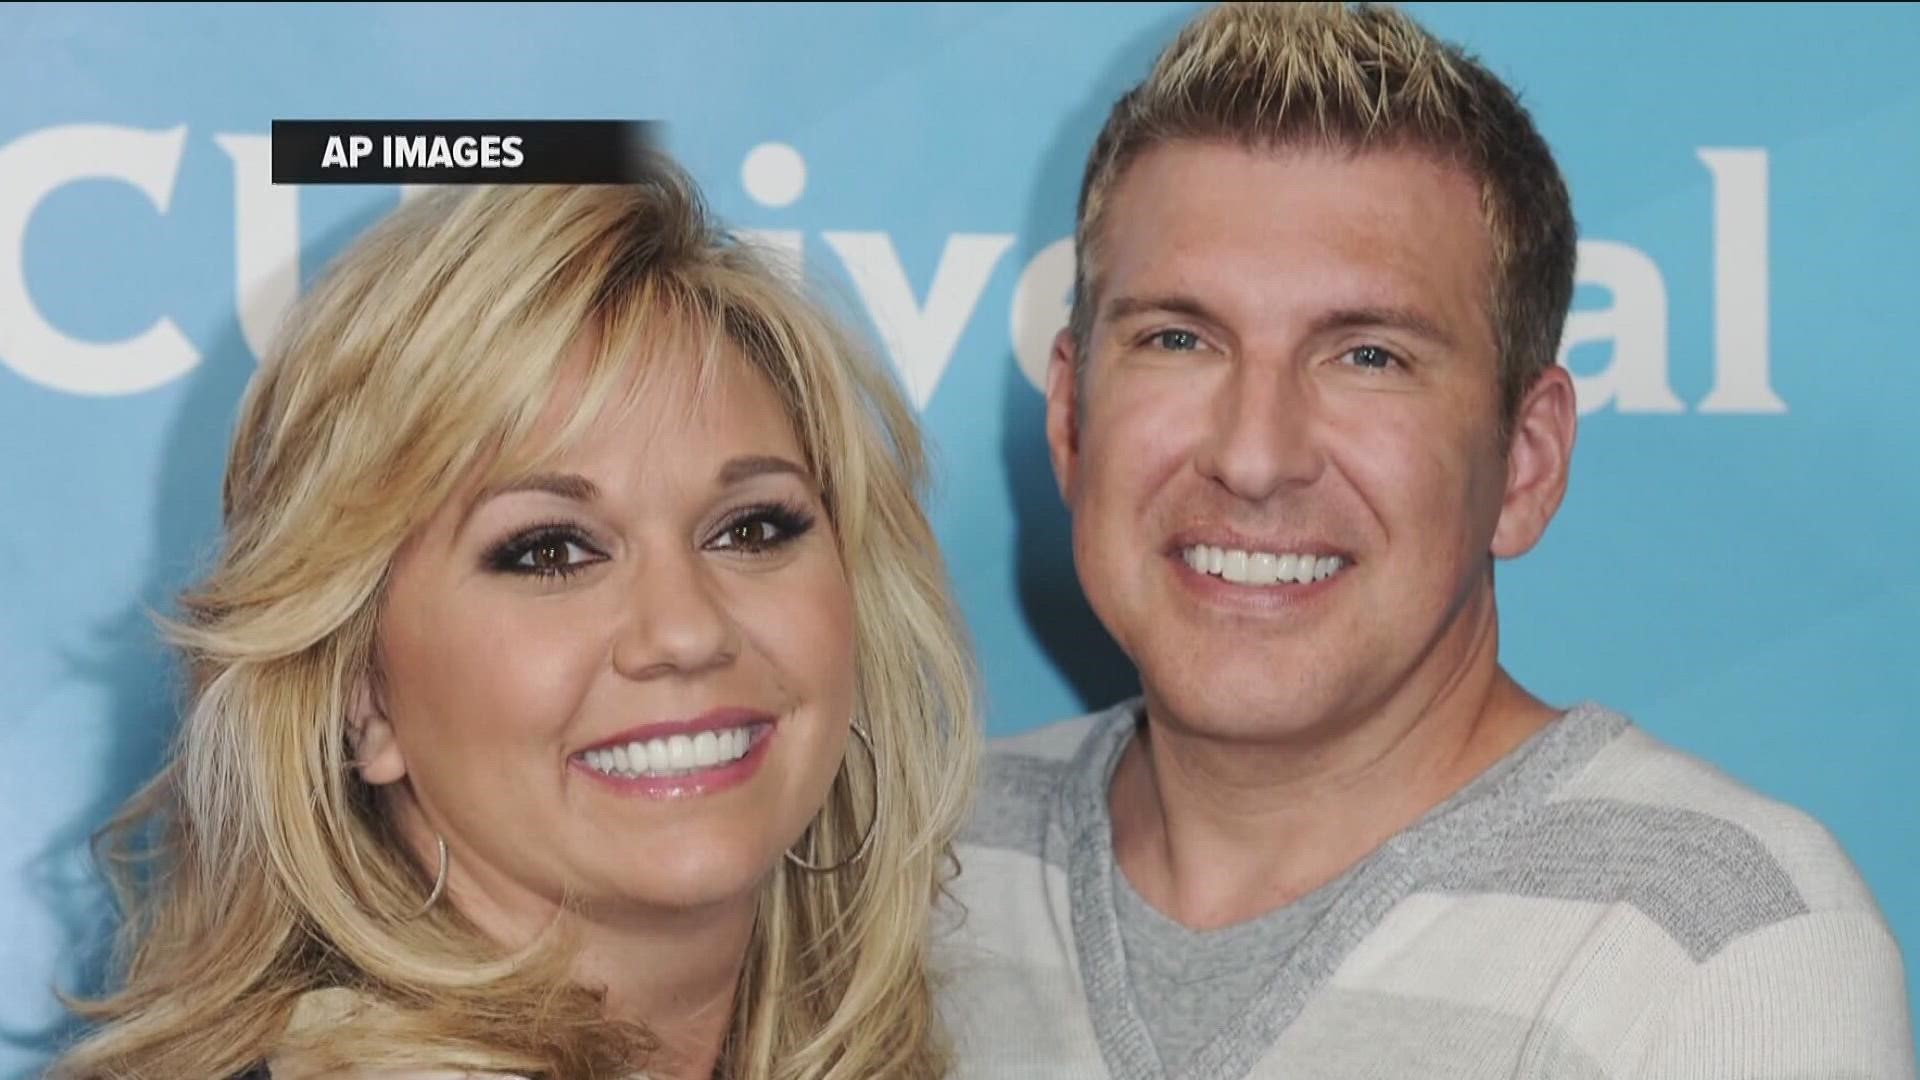 Todd Chrisley will start his 12 year sentence at prison in Pensacola, Florida and Julie will start her seven-year sentence at a prison in Marianna, Florida Tuesday.